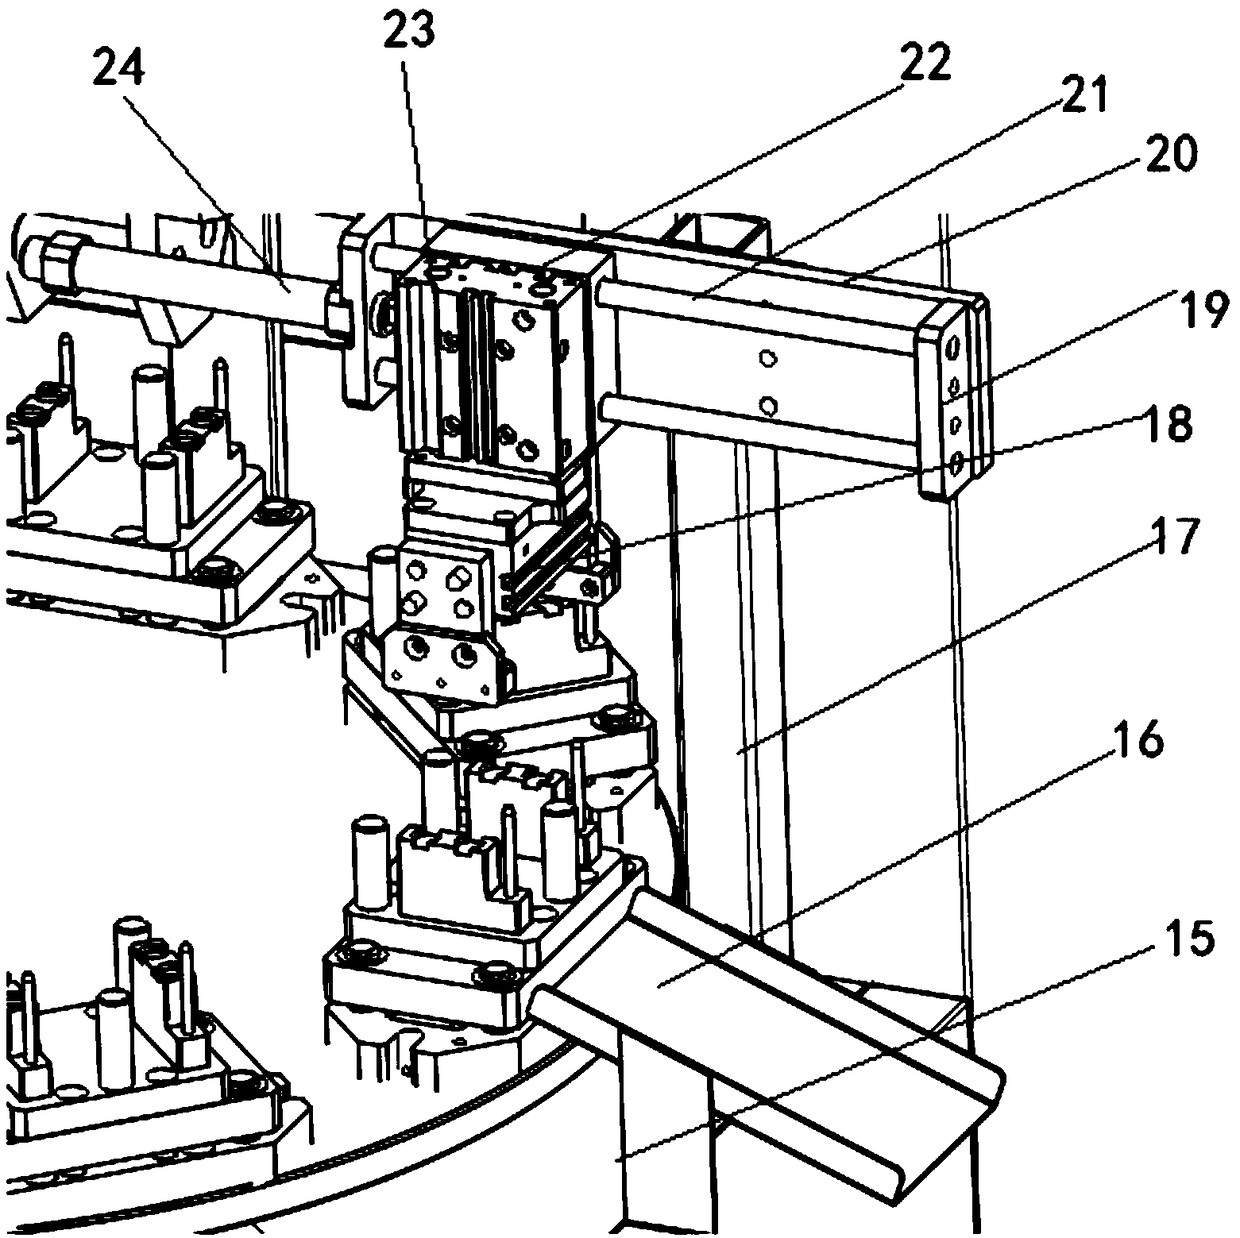 Multi-station riveting and pressing device